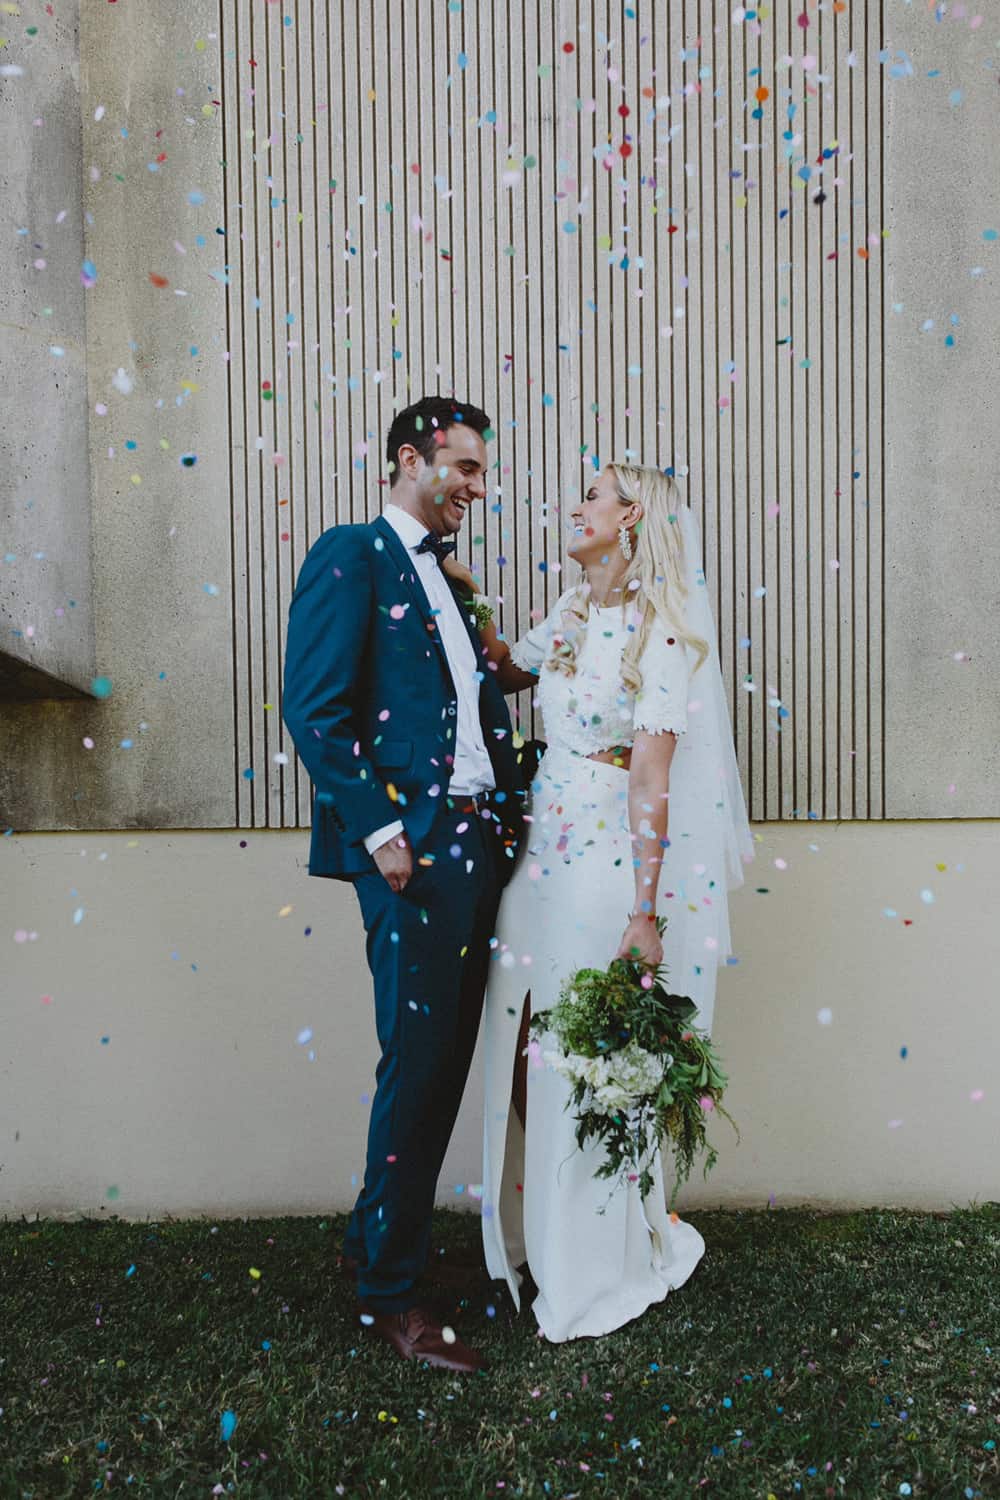 Top 10 weddings of 2016 - Modern Sydney wedding by Willow & Co Photography